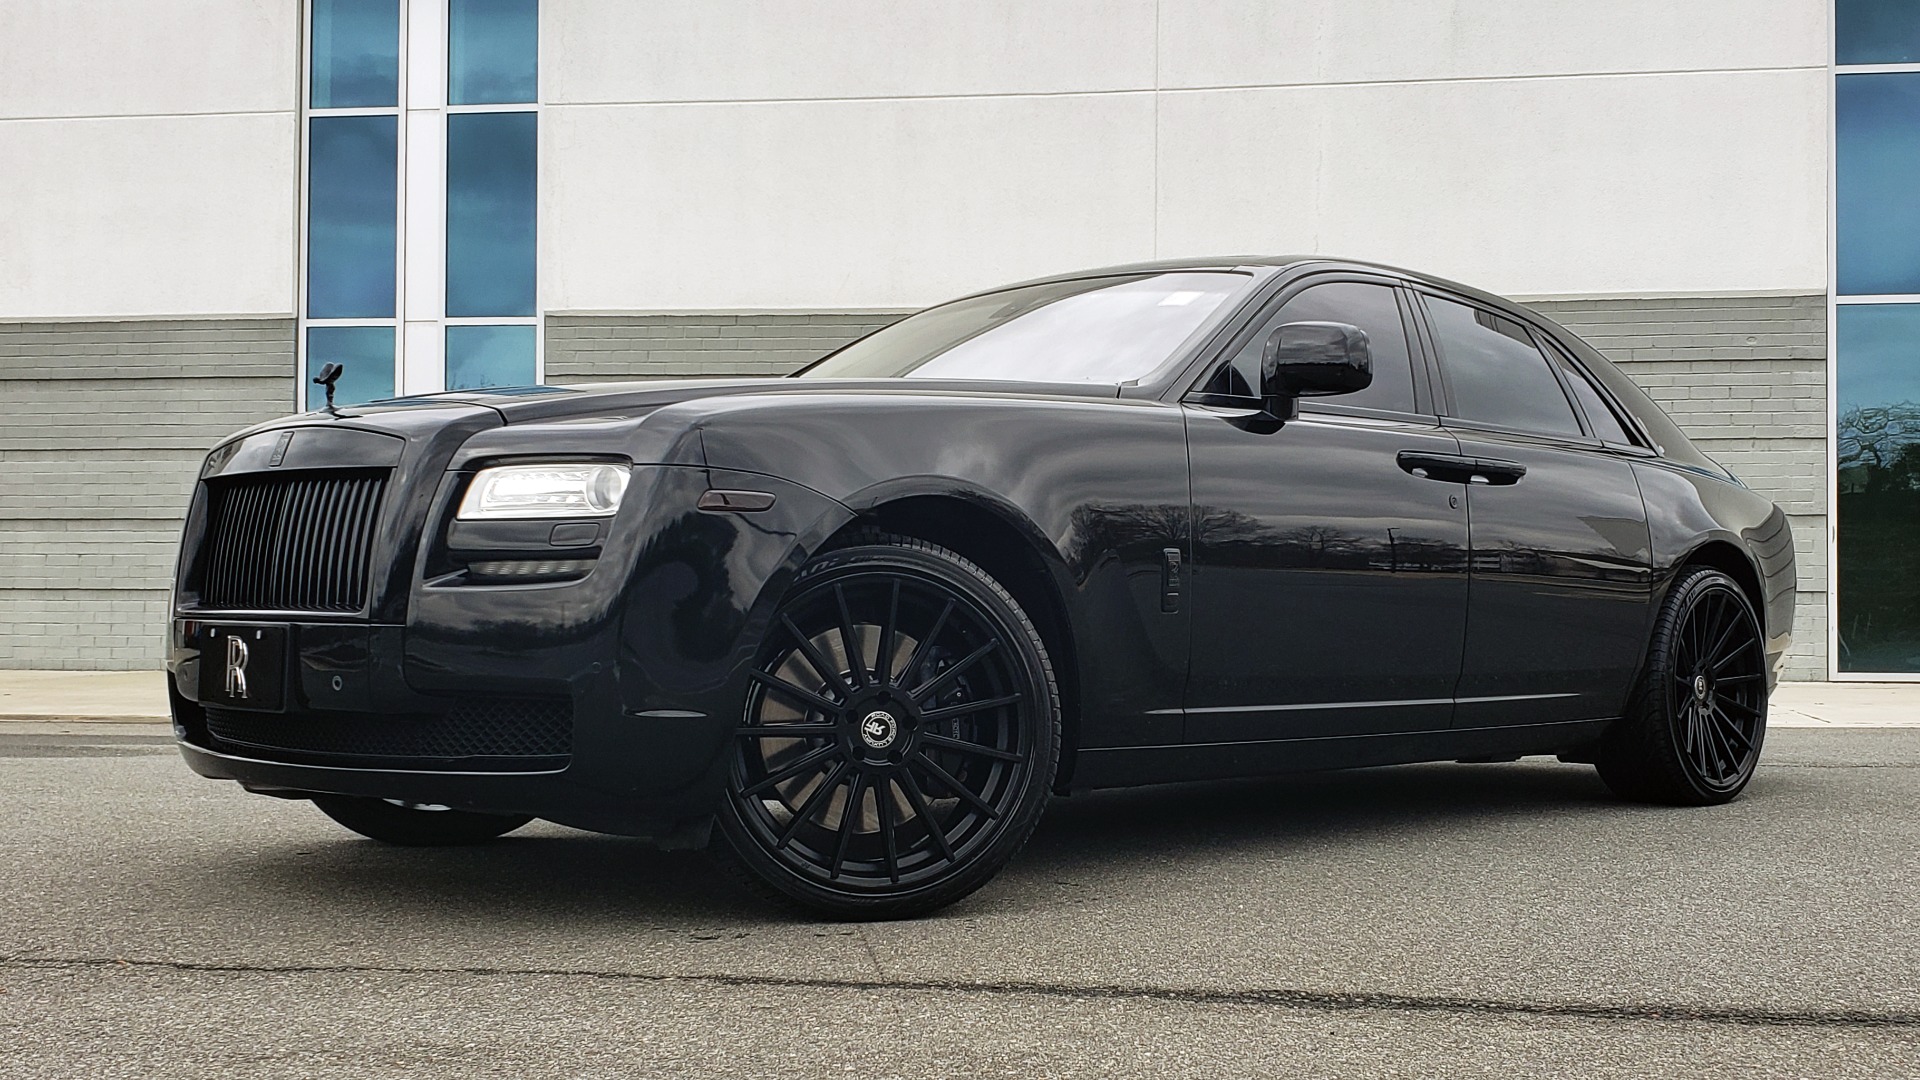 Used 2010 Rolls-Royce GHOST 6.6L TURBO V12 (563HP) / NAV / SUNROOF /  SUICIDE DOORS For Sale ($89,000) | Formula Imports Stock #FC10986